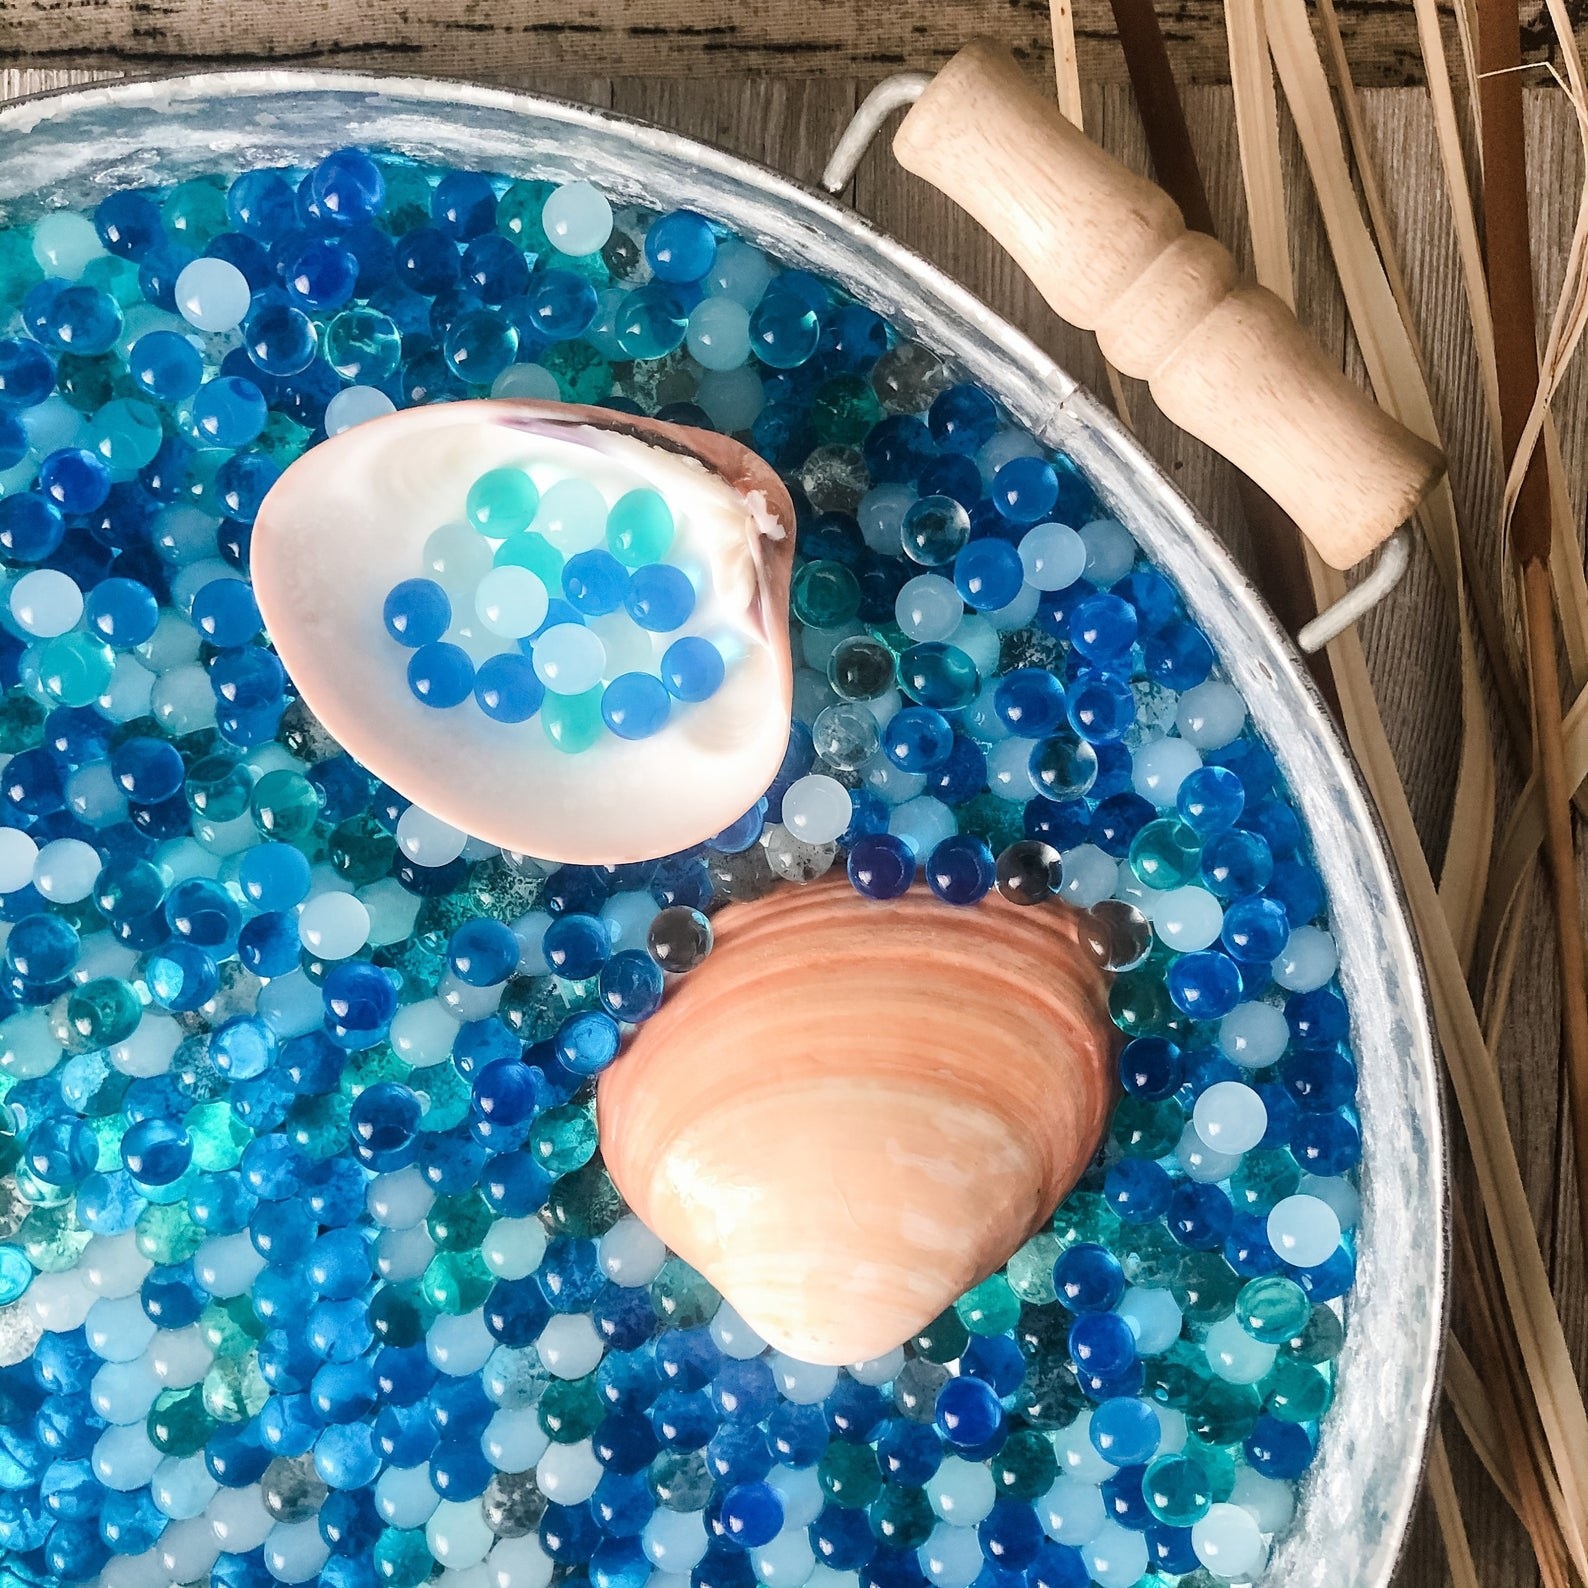 Blue, teal, clear, and white water beads with a clam shell scoop